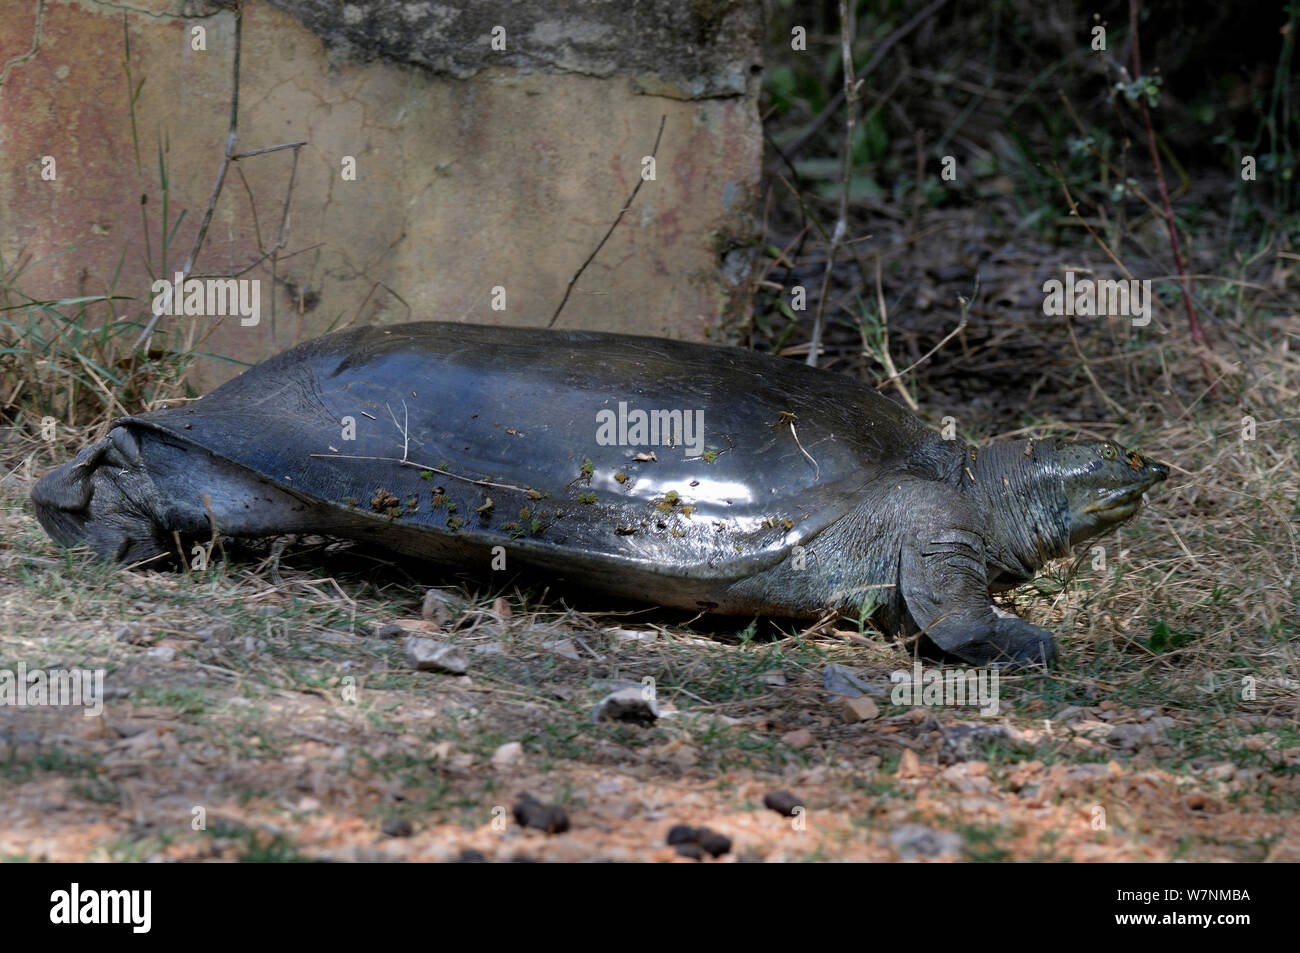 Indian flapshell turtle (Lissemys punctata) out of water, Keolado Ghana National Park, Bharatpur, Rajasthan, India Stock Photo